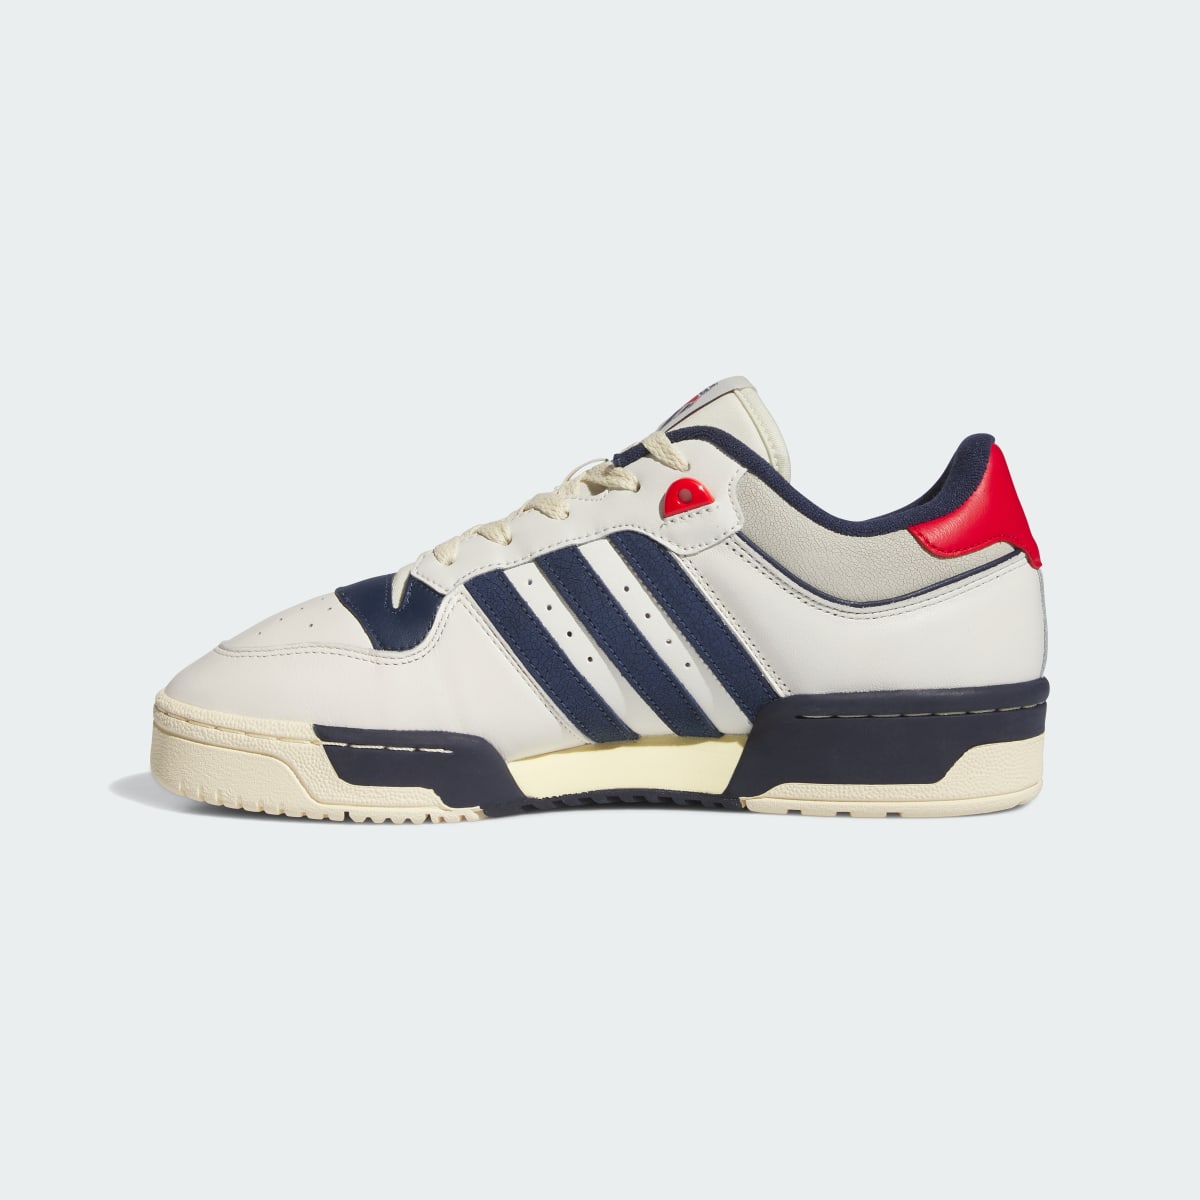 Adidas Rivalry 86 Low Shoes. 7